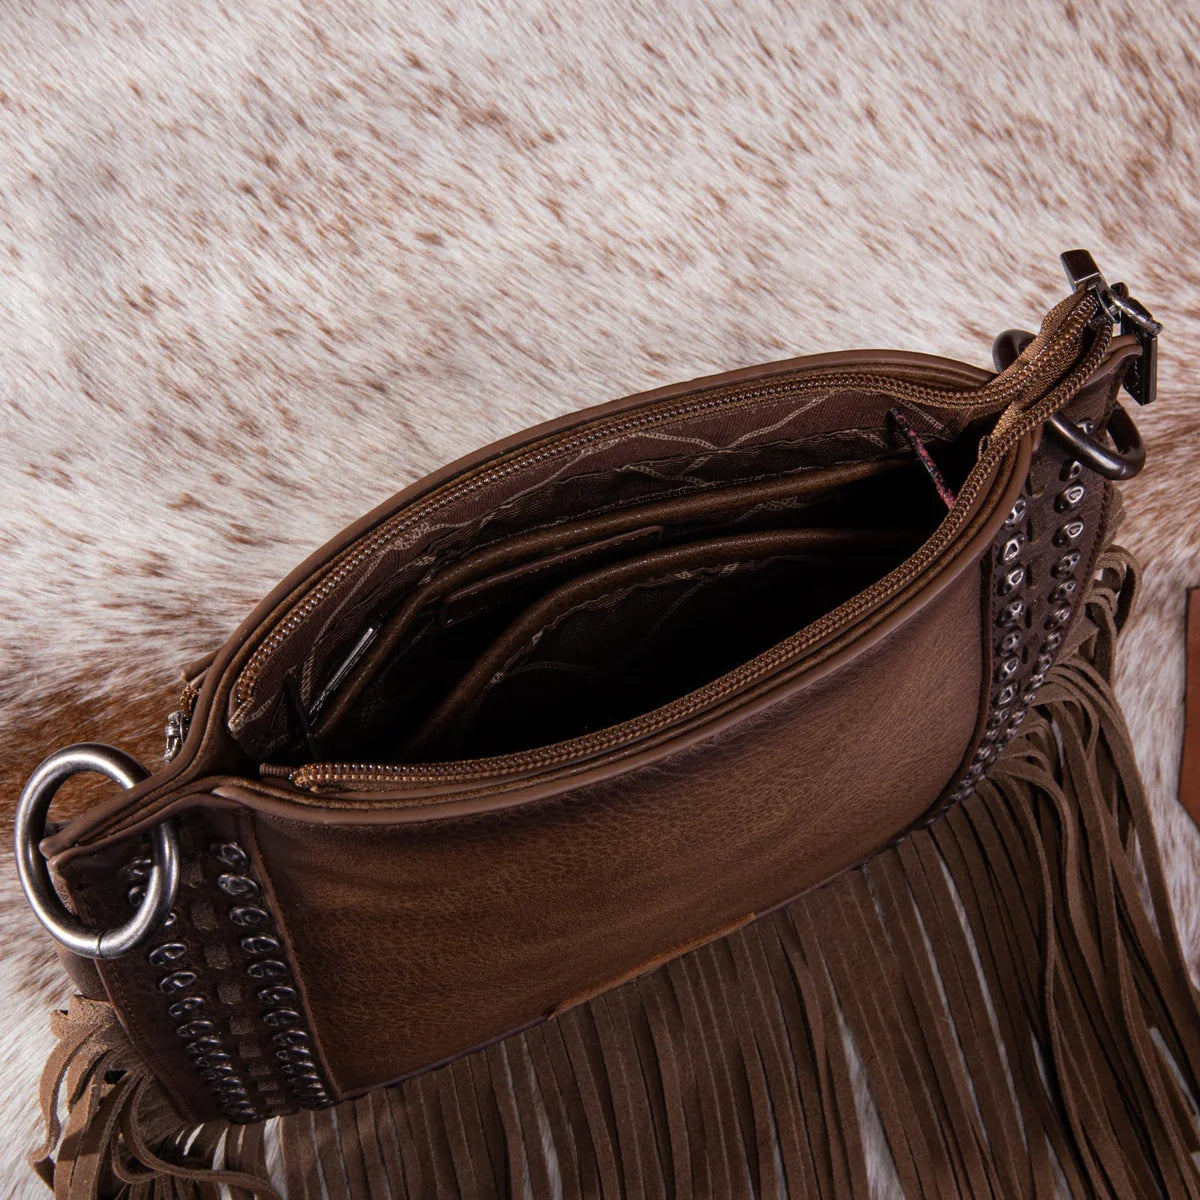 Wrangler Rivets Fringe Concealed Carry Crossbody - Coffee